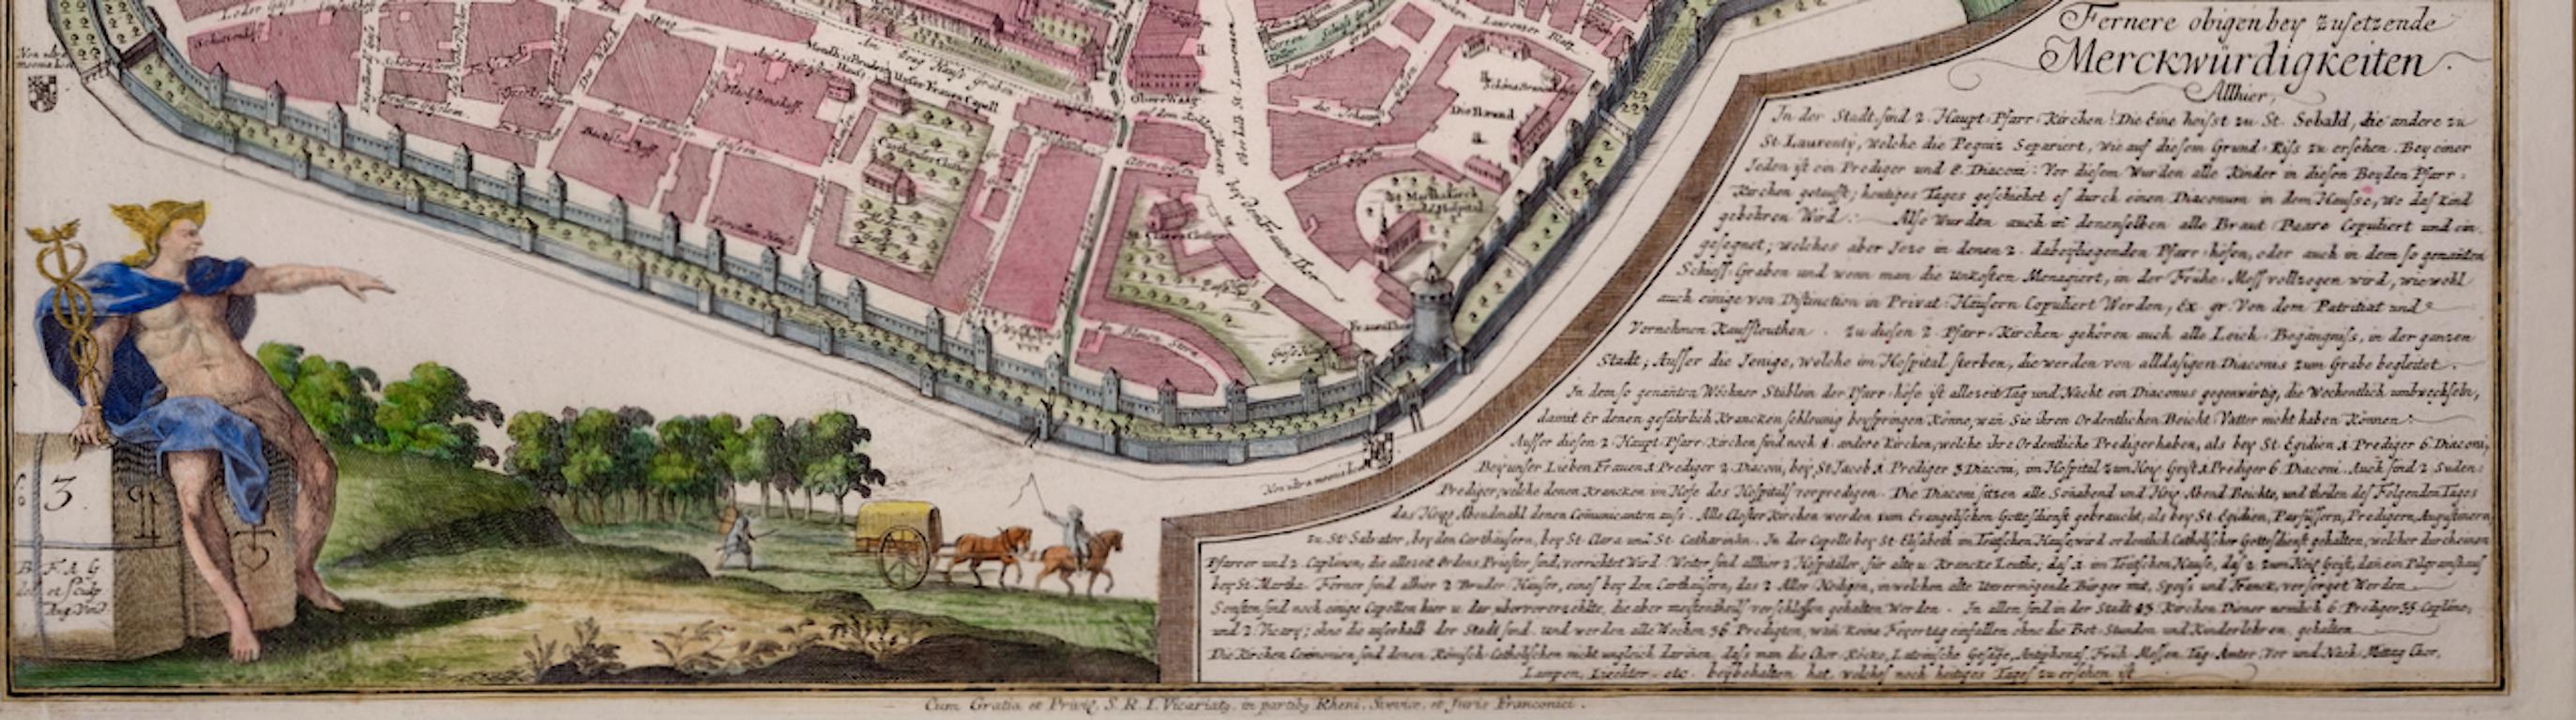 City View of Nuremberg, Germany: An 18th Century Hand-Colored Map by M. Seutter For Sale 4